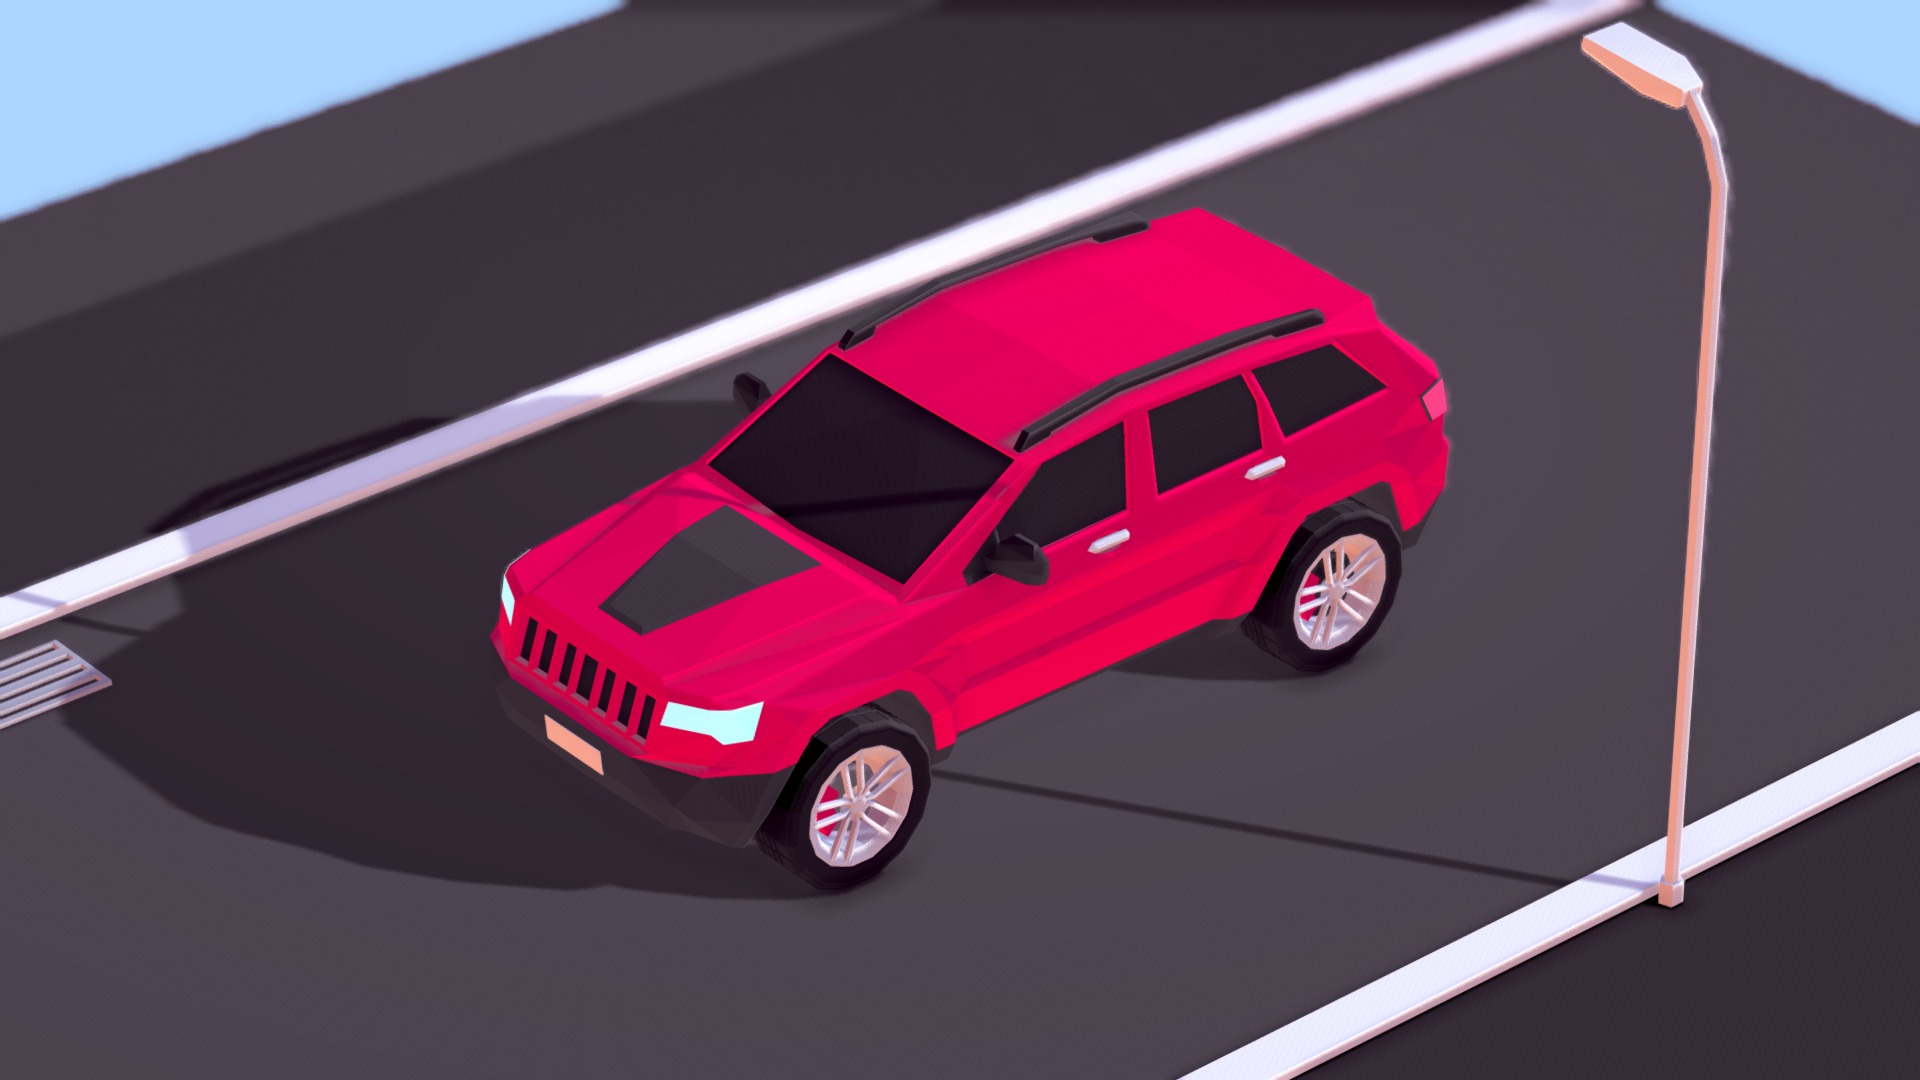 Cartoon Low Poly Jeep Vehicle illustration

Created on Cinema 4d R17 

9538 Polygons

Procedural Textured 

Game Ready, VR Ready
 - Cartoon Low Poly Cherokee Jeep Car - 3D model by antonmoek 3d model